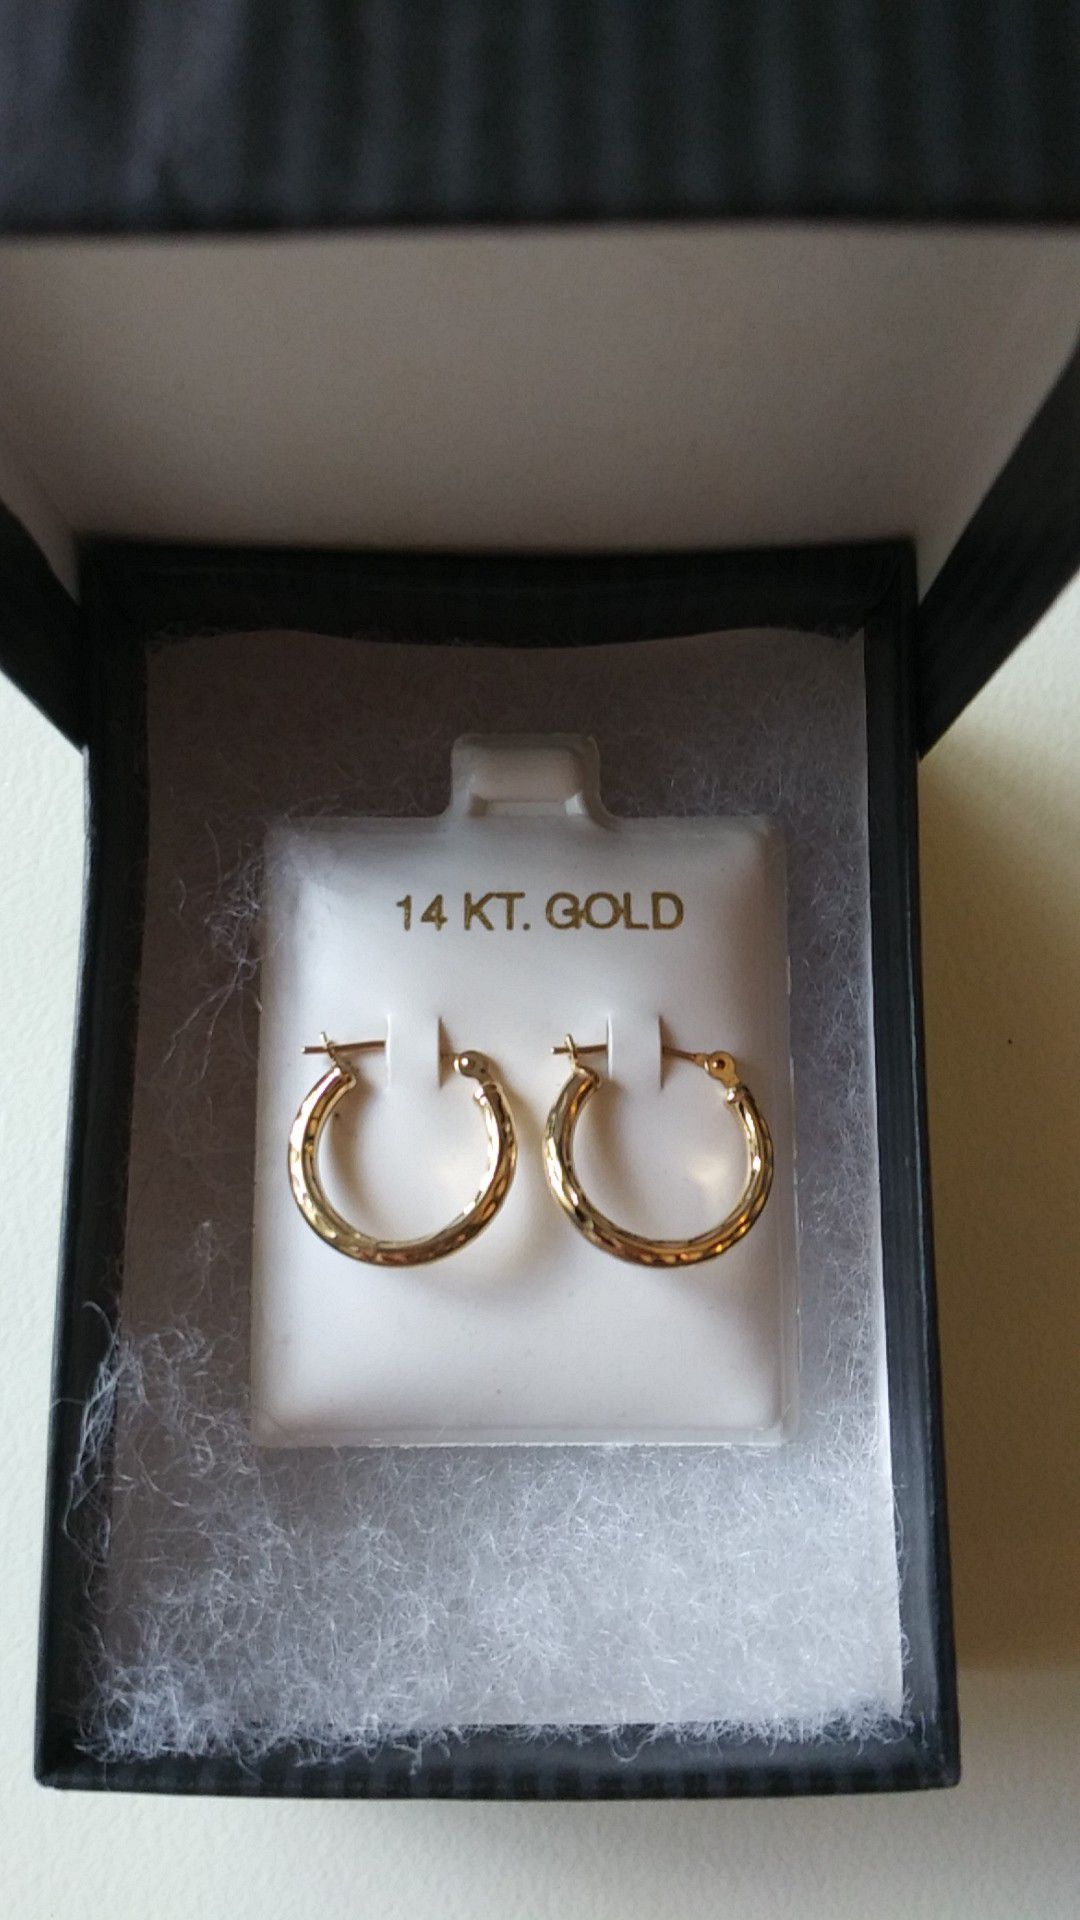 Brand new (never used) pair of (real) 14kt gold diamond cut hoop earrings in great shape and condition just need gone please its a (emergency)